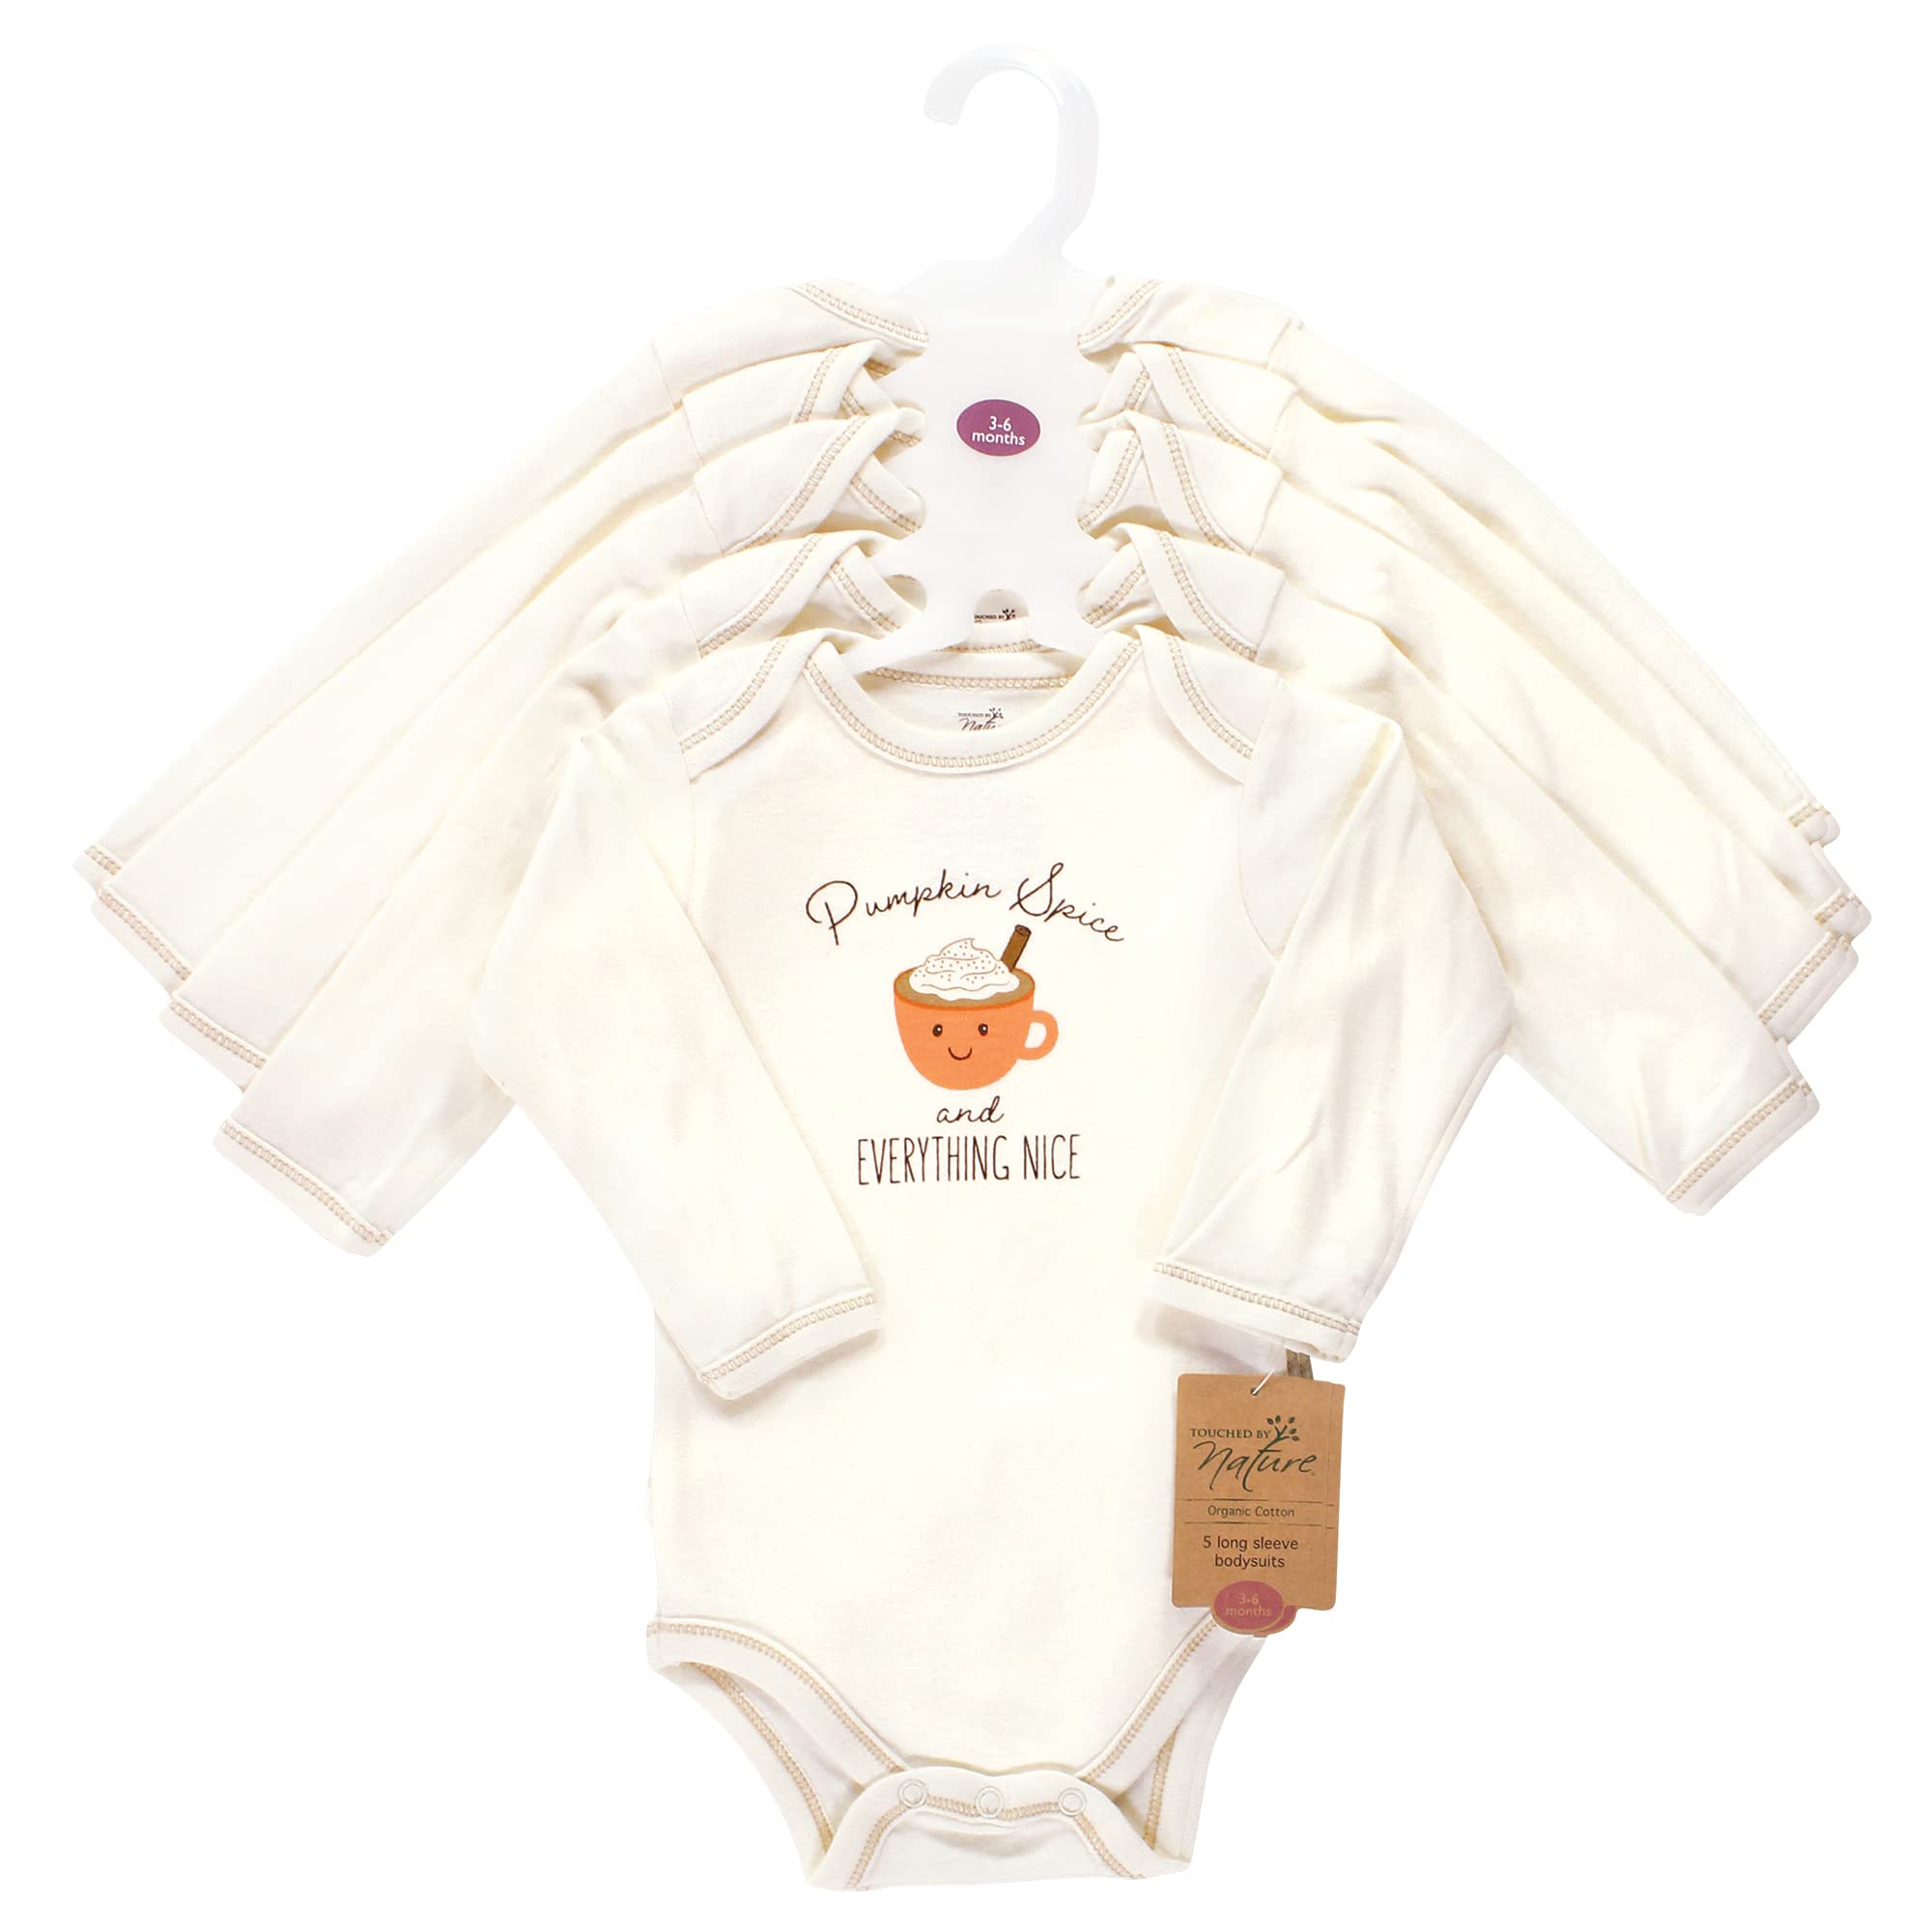 Touched by Nature unisex-baby Organic Cotton Long-sleeve Bodysuits